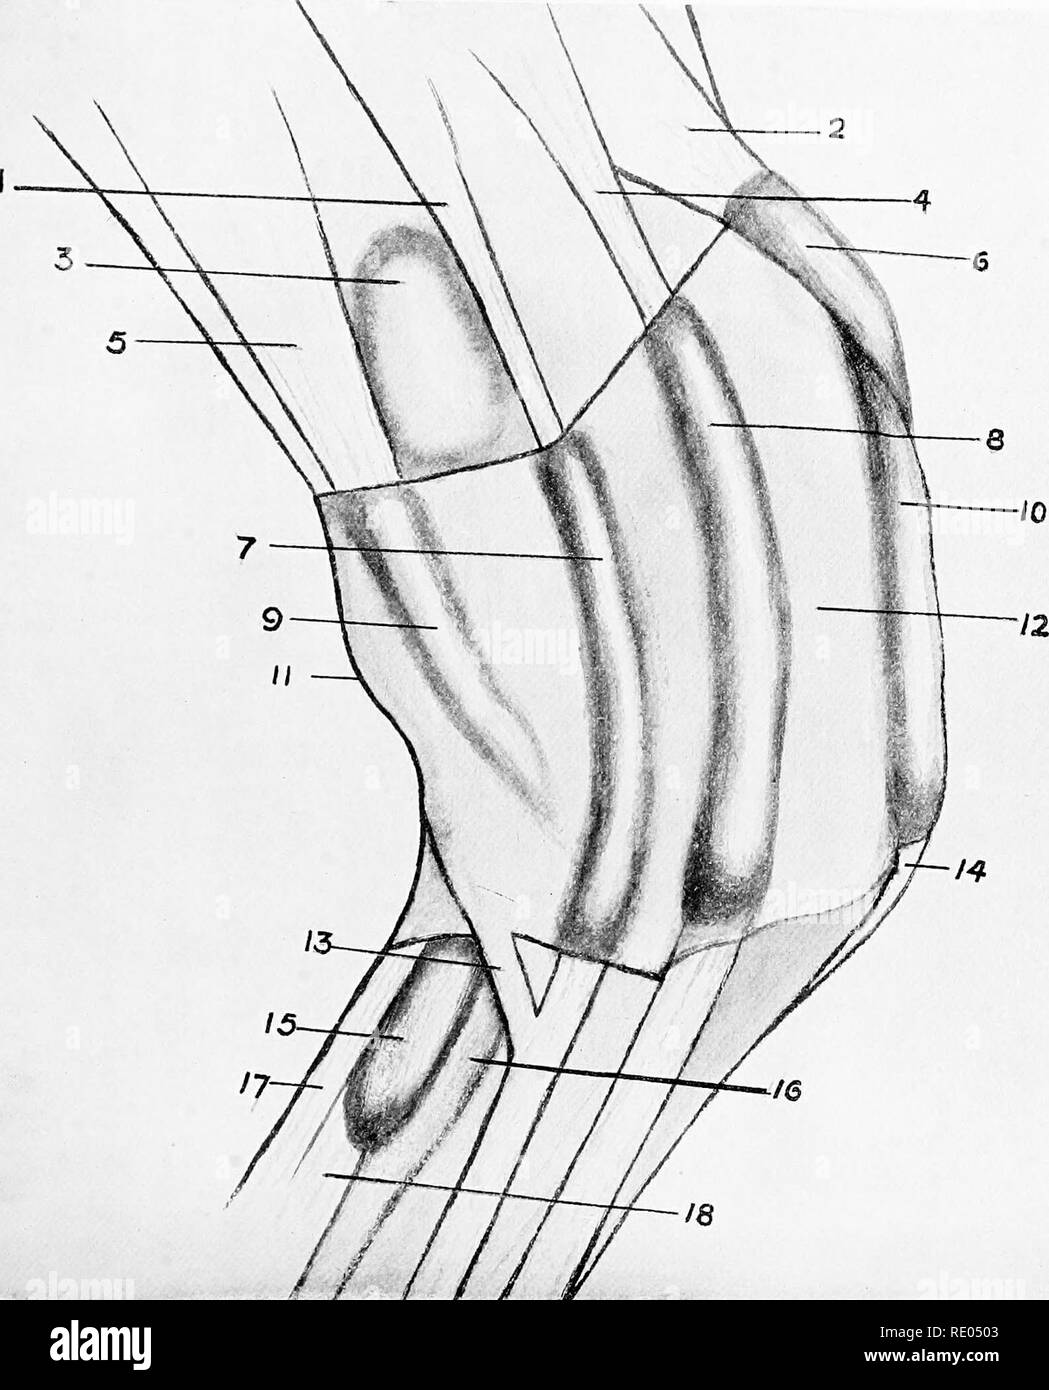 . The surgical anatomy of the horse ... Horses. Plate XXV. -Outer Aspect of Right Knee showing Distended Sheaths (Semi-Schematic) I. Tendon of extensor suffraginis. 2. Tendon of extensor nietacarpi obliquus. 3. Synovial membrane of carpal sheath. 4. Tendon of extensor pedis. 5. Tendon of flexor nietacarpi externus. 6. Sheath of extensor metacarpi obliquus. 7. Sheath of extensor suffraginis. 8. Sheath of extensor pedis. 9. Sheath of outer tendon of flexor metacarpi externus. 10. Sheath of extensor metacarpi magnus. 11. Ridge of pisiform bone. 12. Annular band. 13. Reinforcing band to extensor s Stock Photo